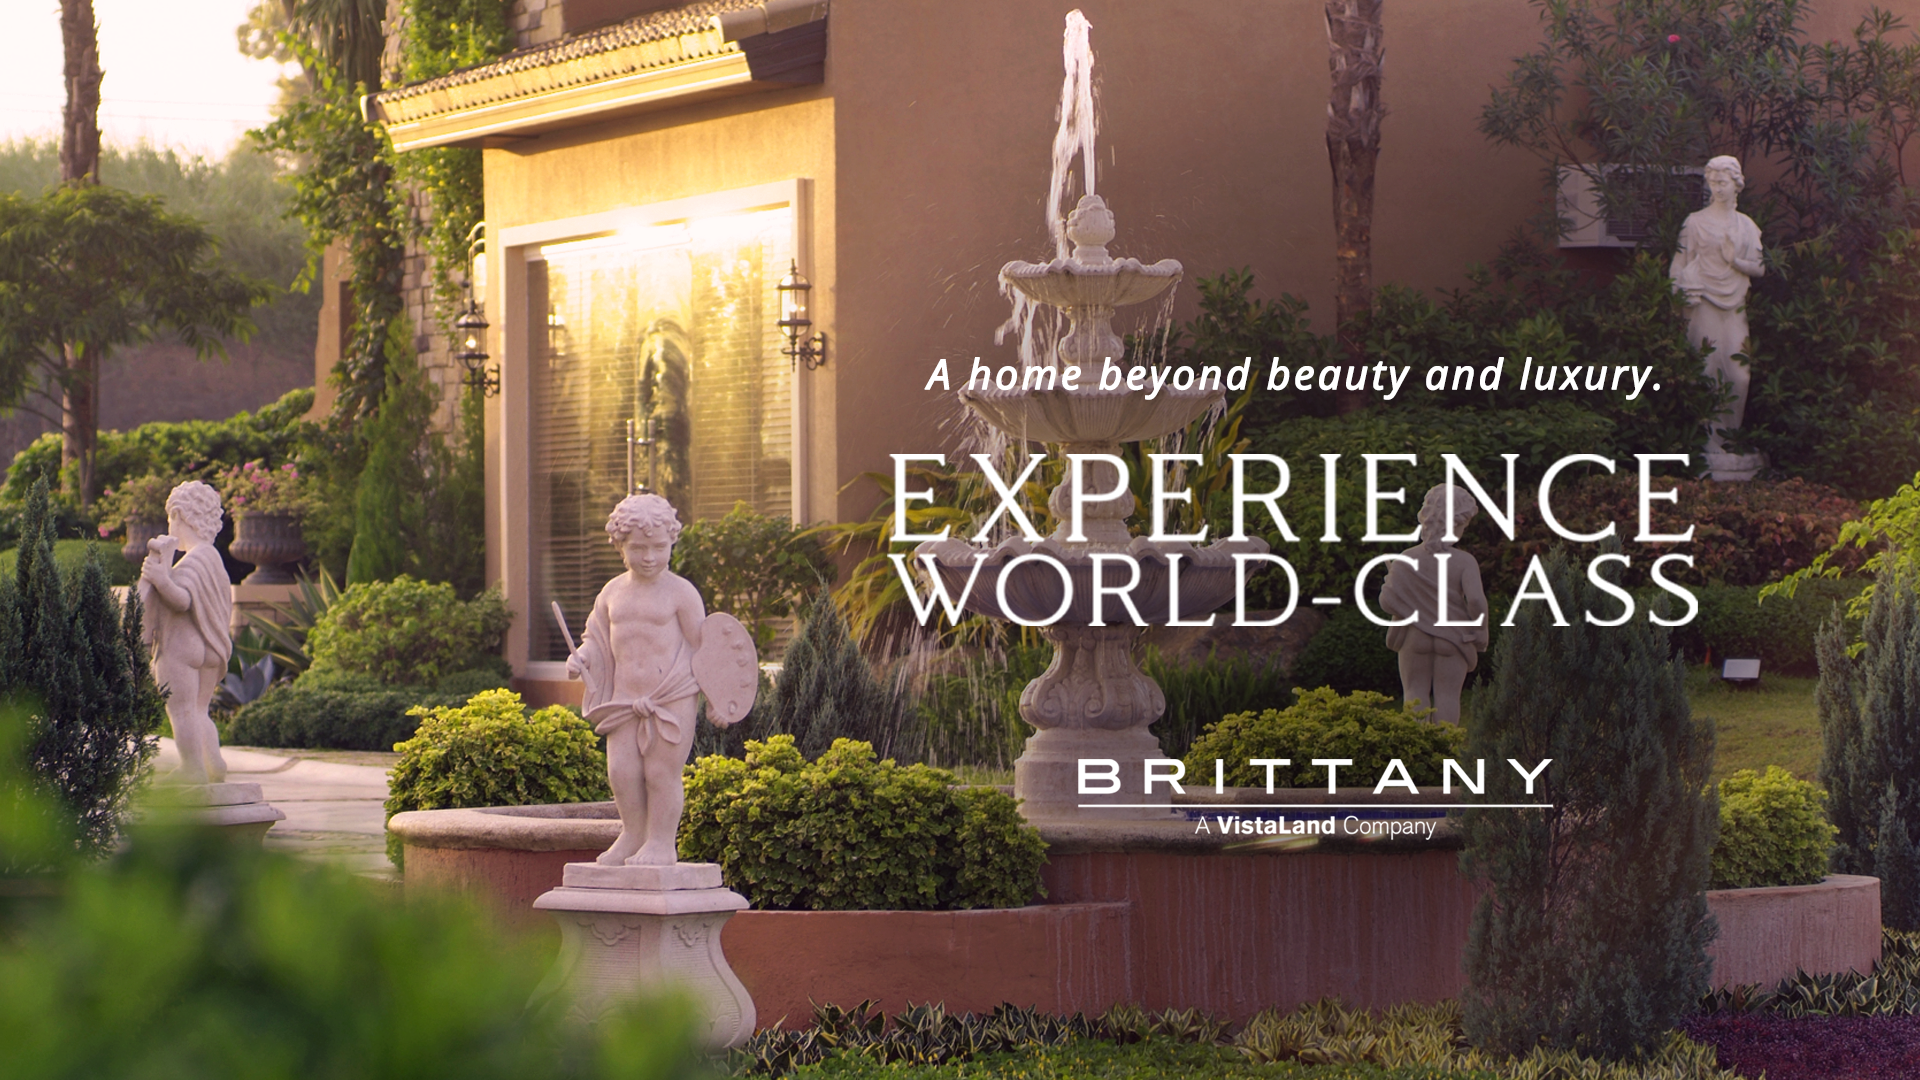 Brittany, The Frontrunner In Luxurious Thematic Real Estate Development